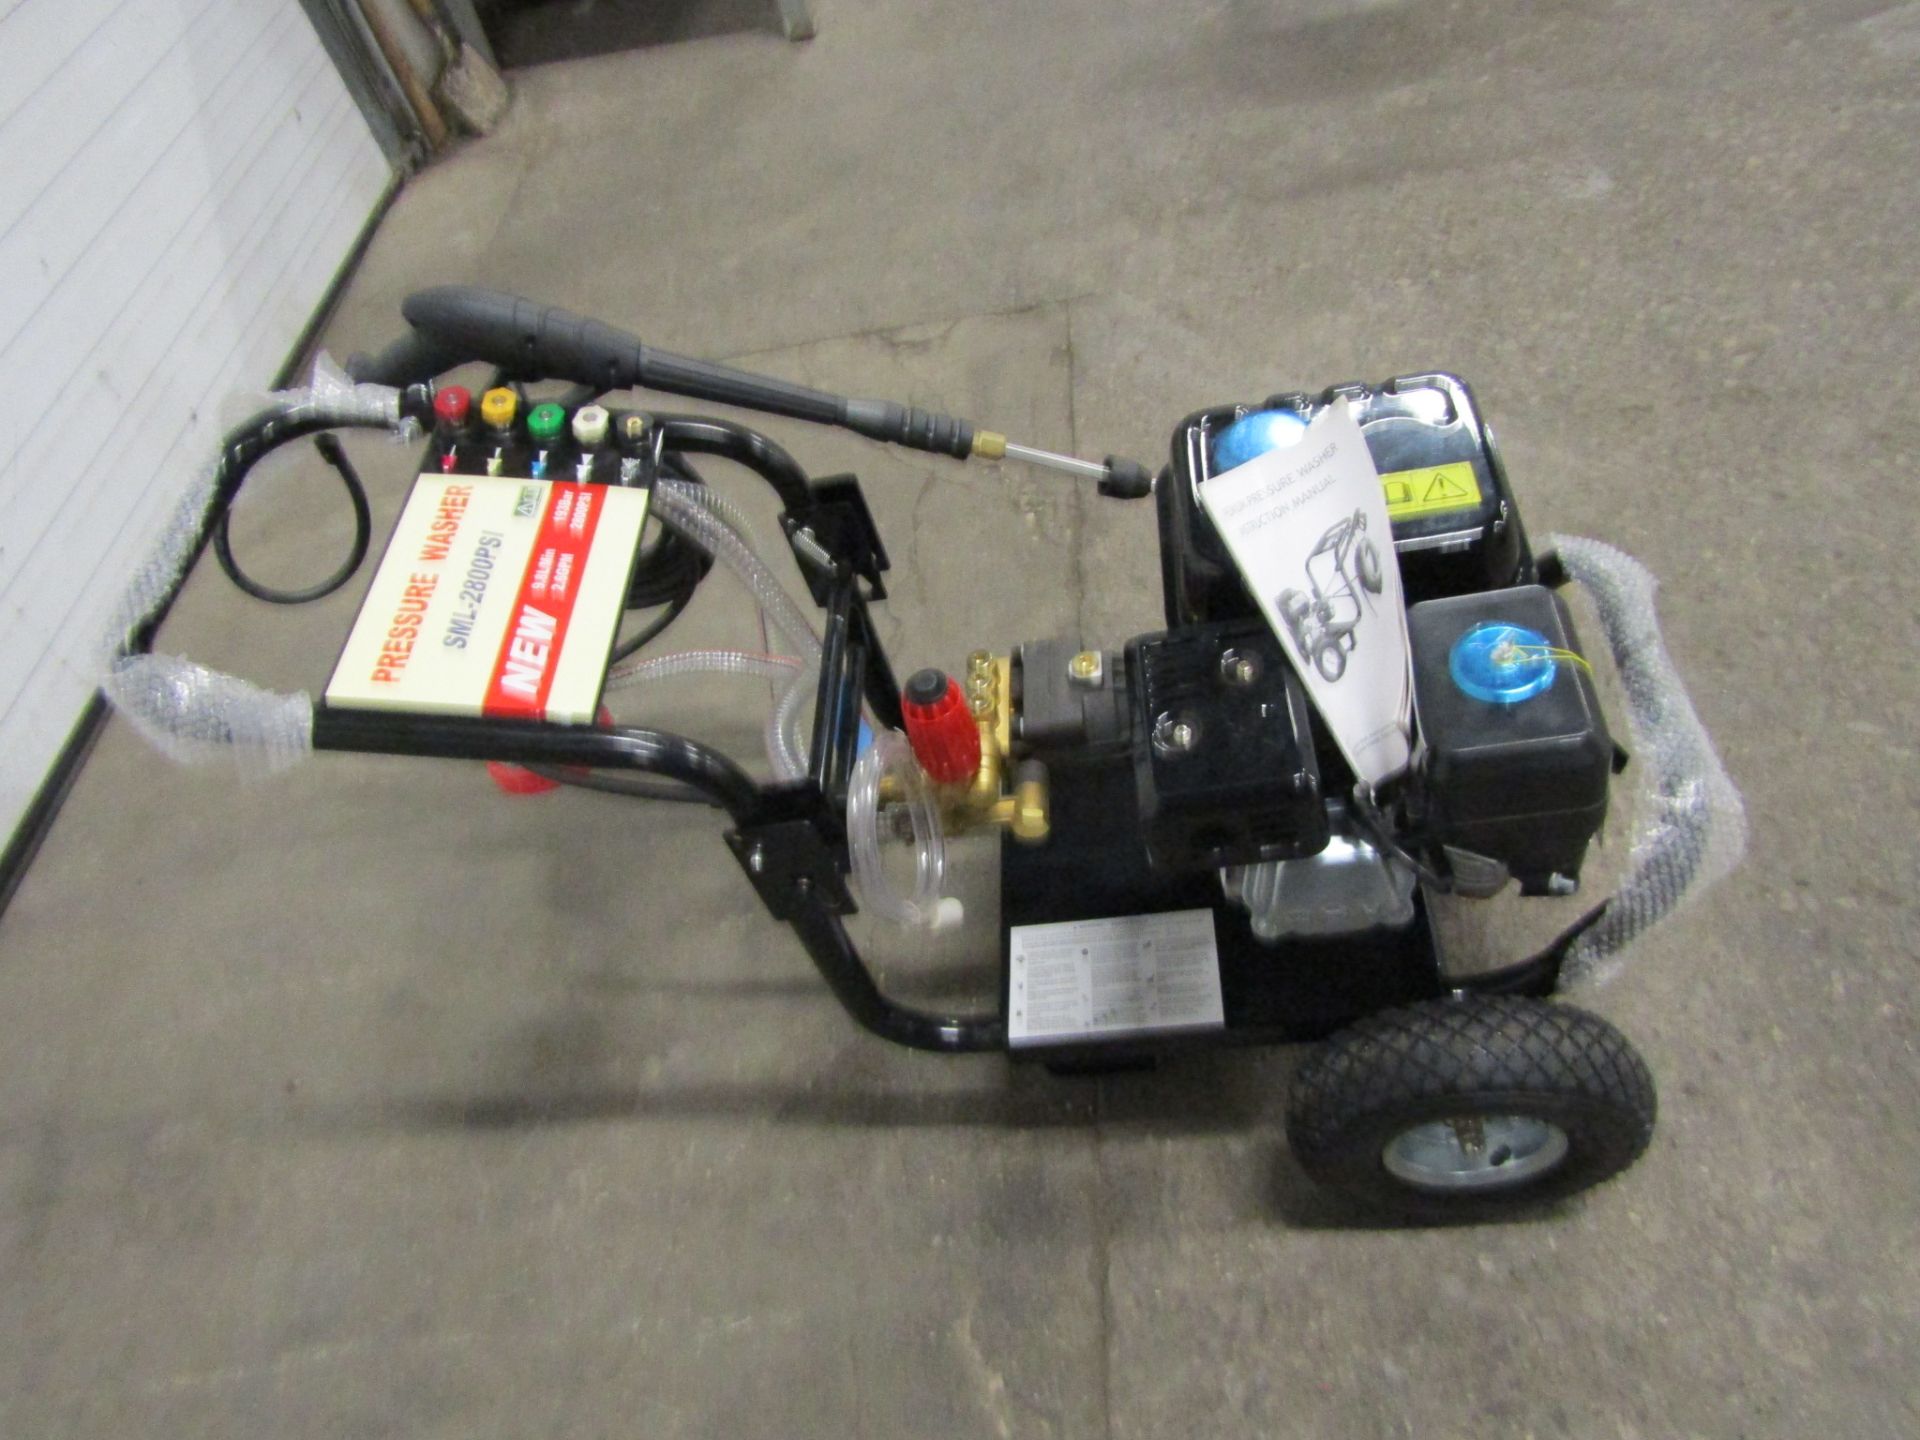 Brand New Pressure Power Washer - Gas Powered Unit 2800PSI - Variable Speed 2.6GPM with various - Bild 3 aus 3